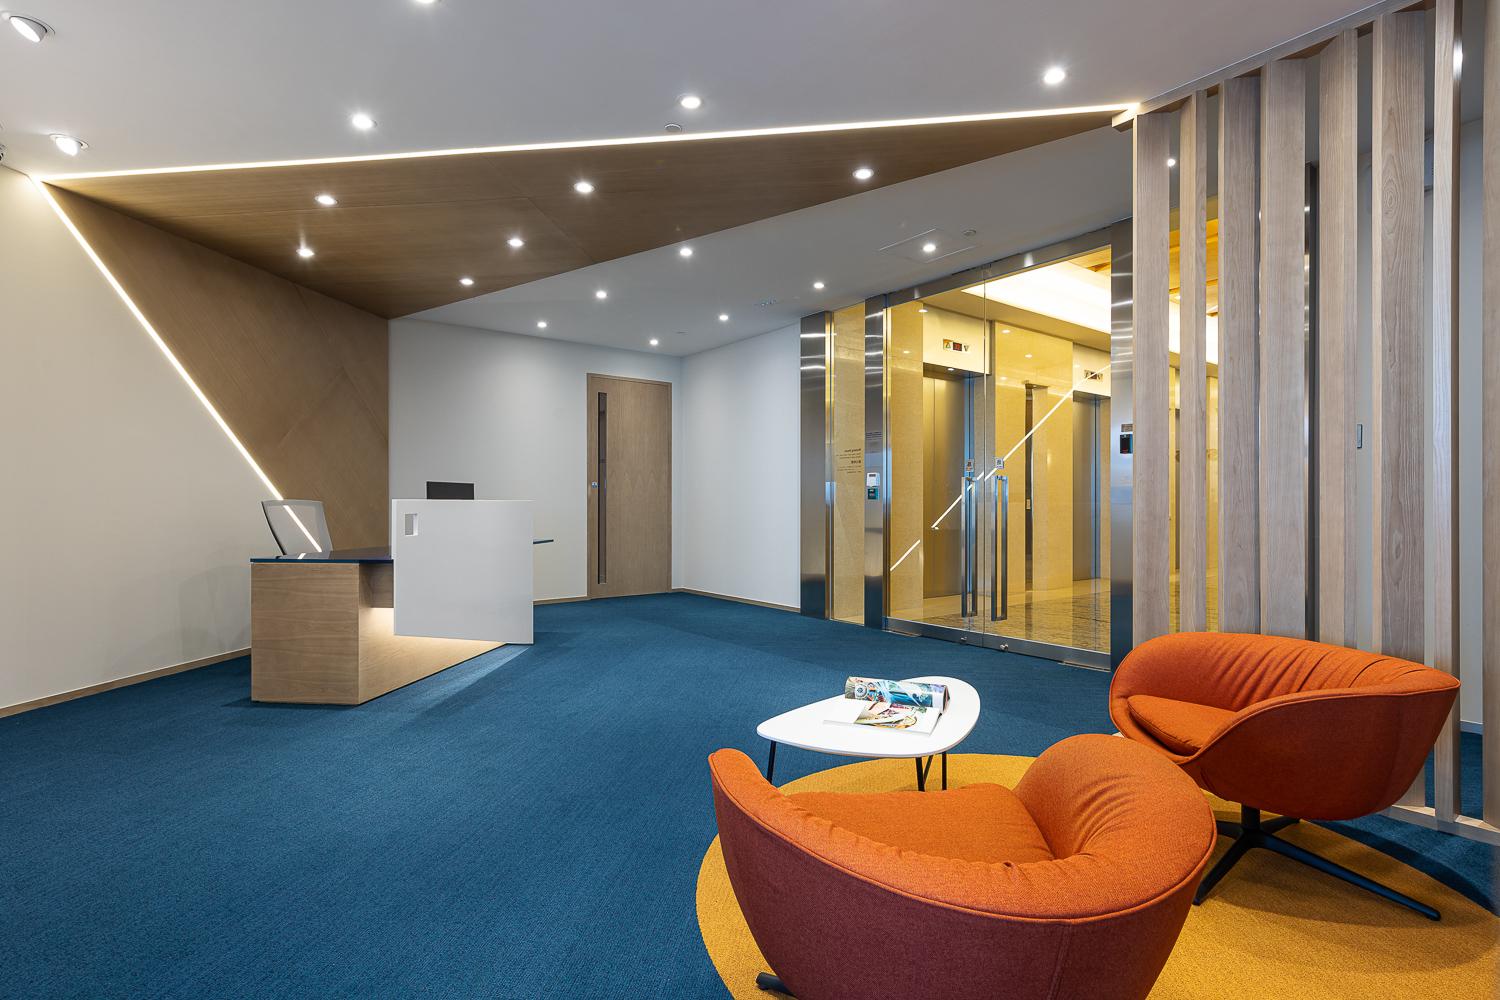 This colourful, contemporary Kwai Chung office is a millennials’ dream